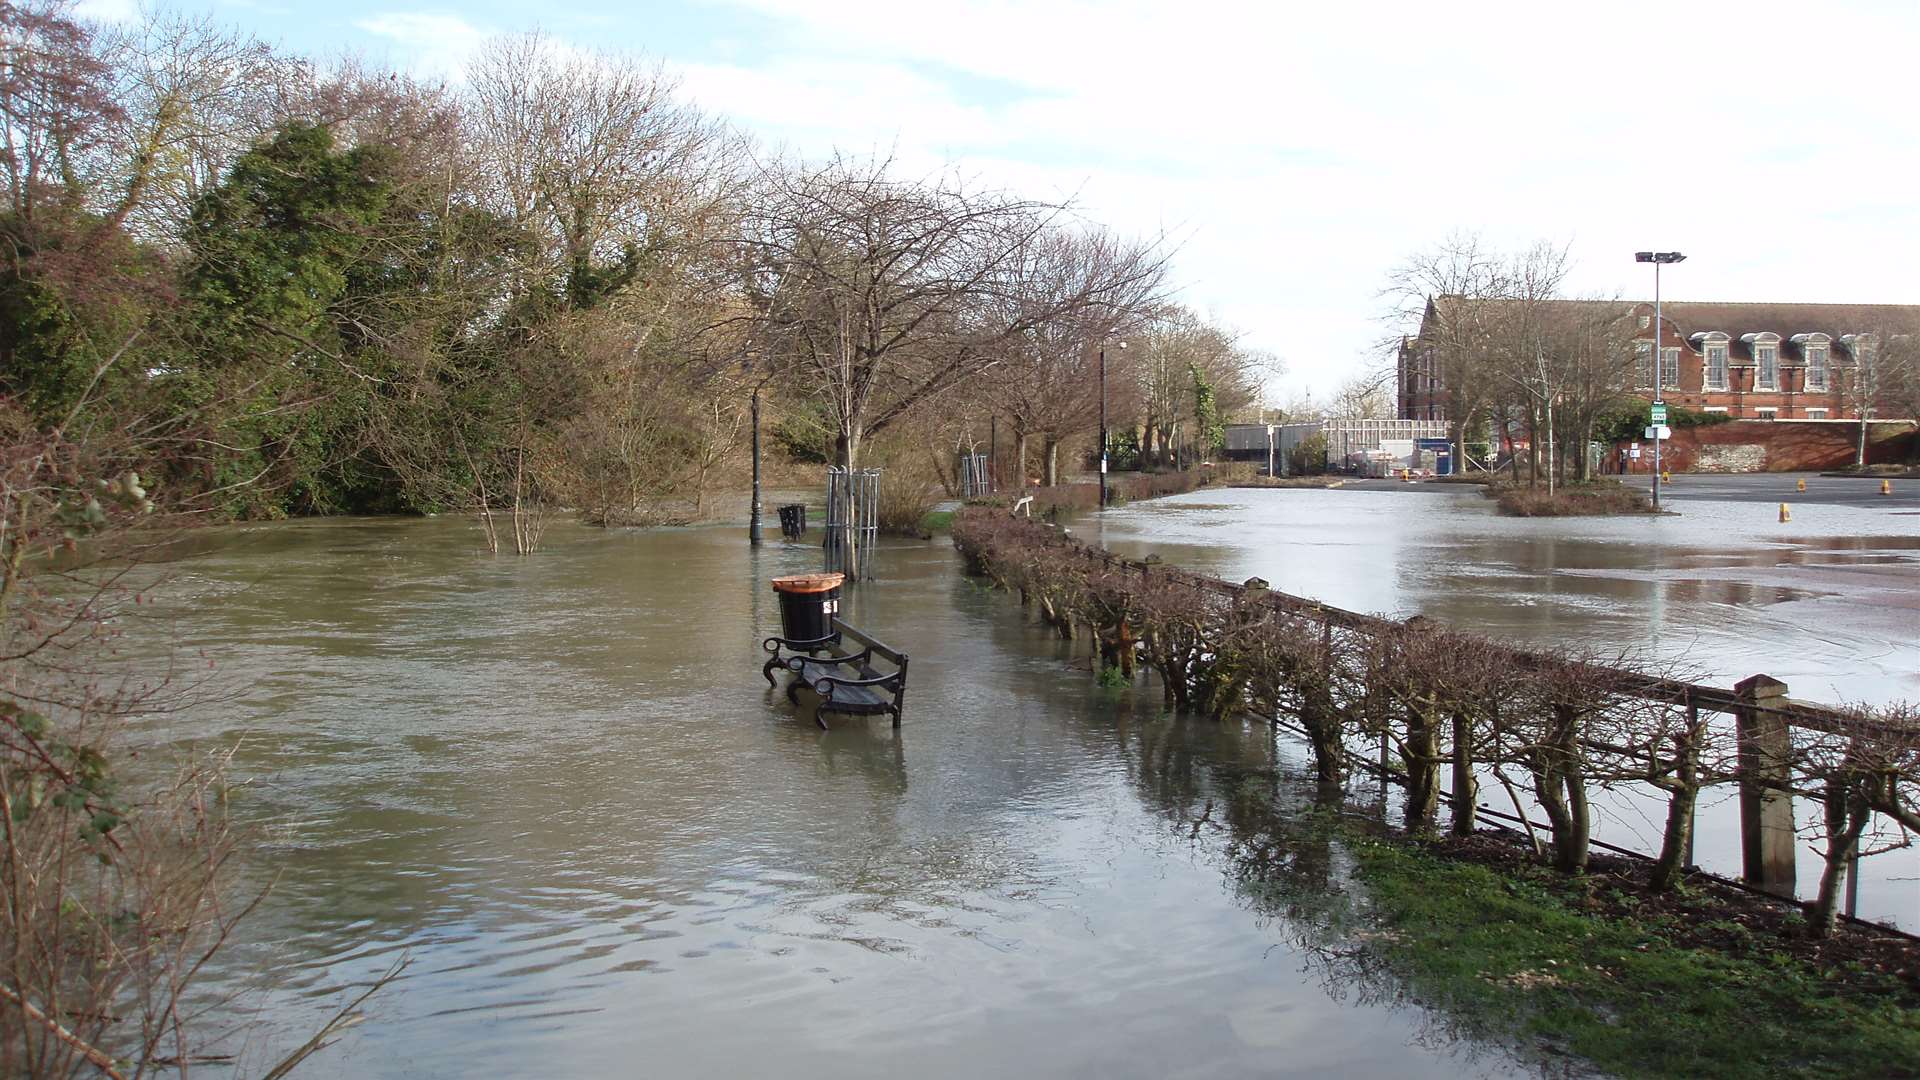 The Stour flooded over into the St Radigun's car park in the city centre. File picture